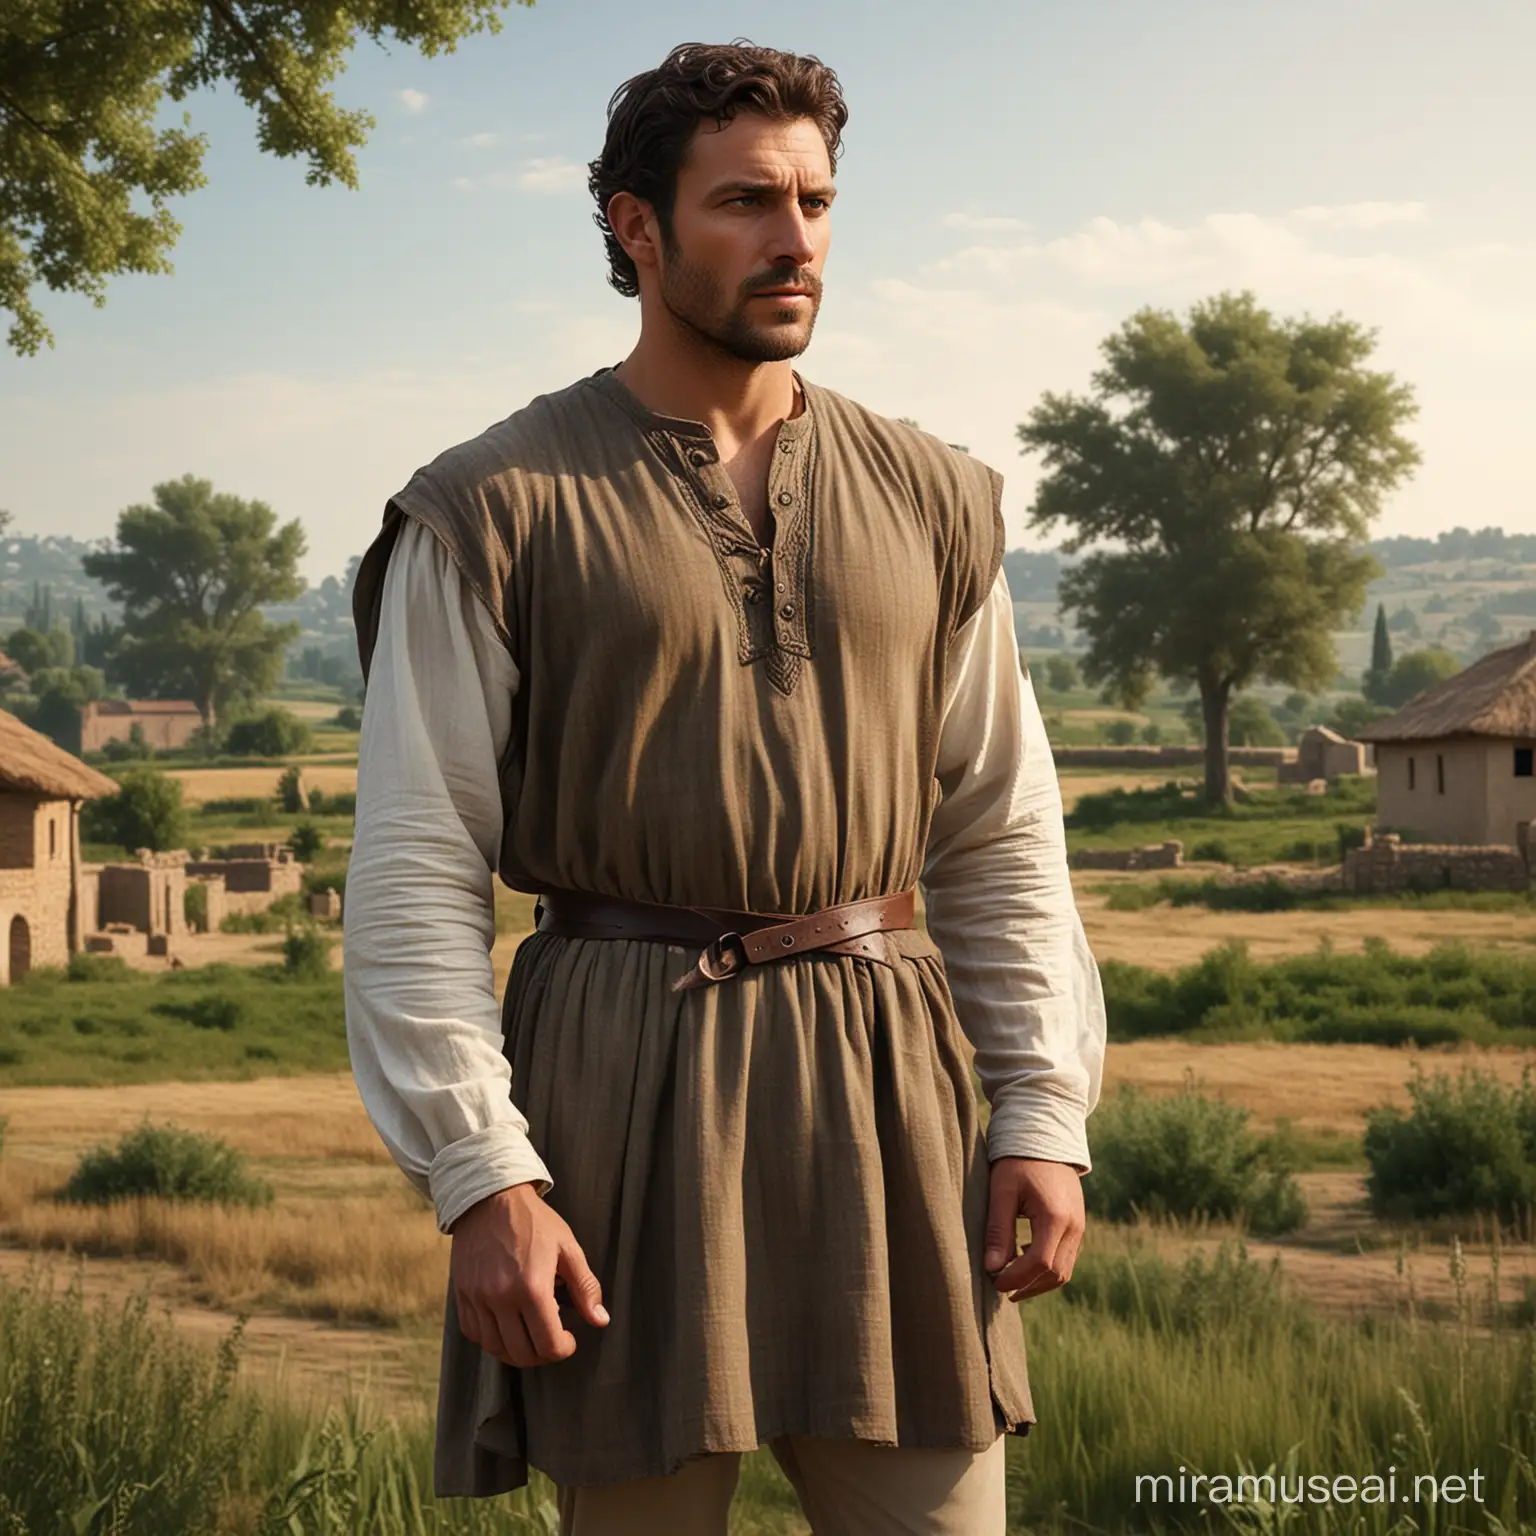 Generate a photorealistic image of a man from the first century AD, framed from the waist to the top of the head, wearing period-appropriate clothing. The man should be depicted standing in a typical rural scene from that time period. The background should include elements such as fields, trees, and simple dwellings characteristic of rural life in the first century AD. Ensure that the man's clothing reflects the attire commonly worn during this historical period, consisting of garments such as a tunic, sandals, and possibly a cloak. The overall image should evoke the atmosphere and lifestyle of rural communities during the first century AD with meticulous attention to detail and realism.